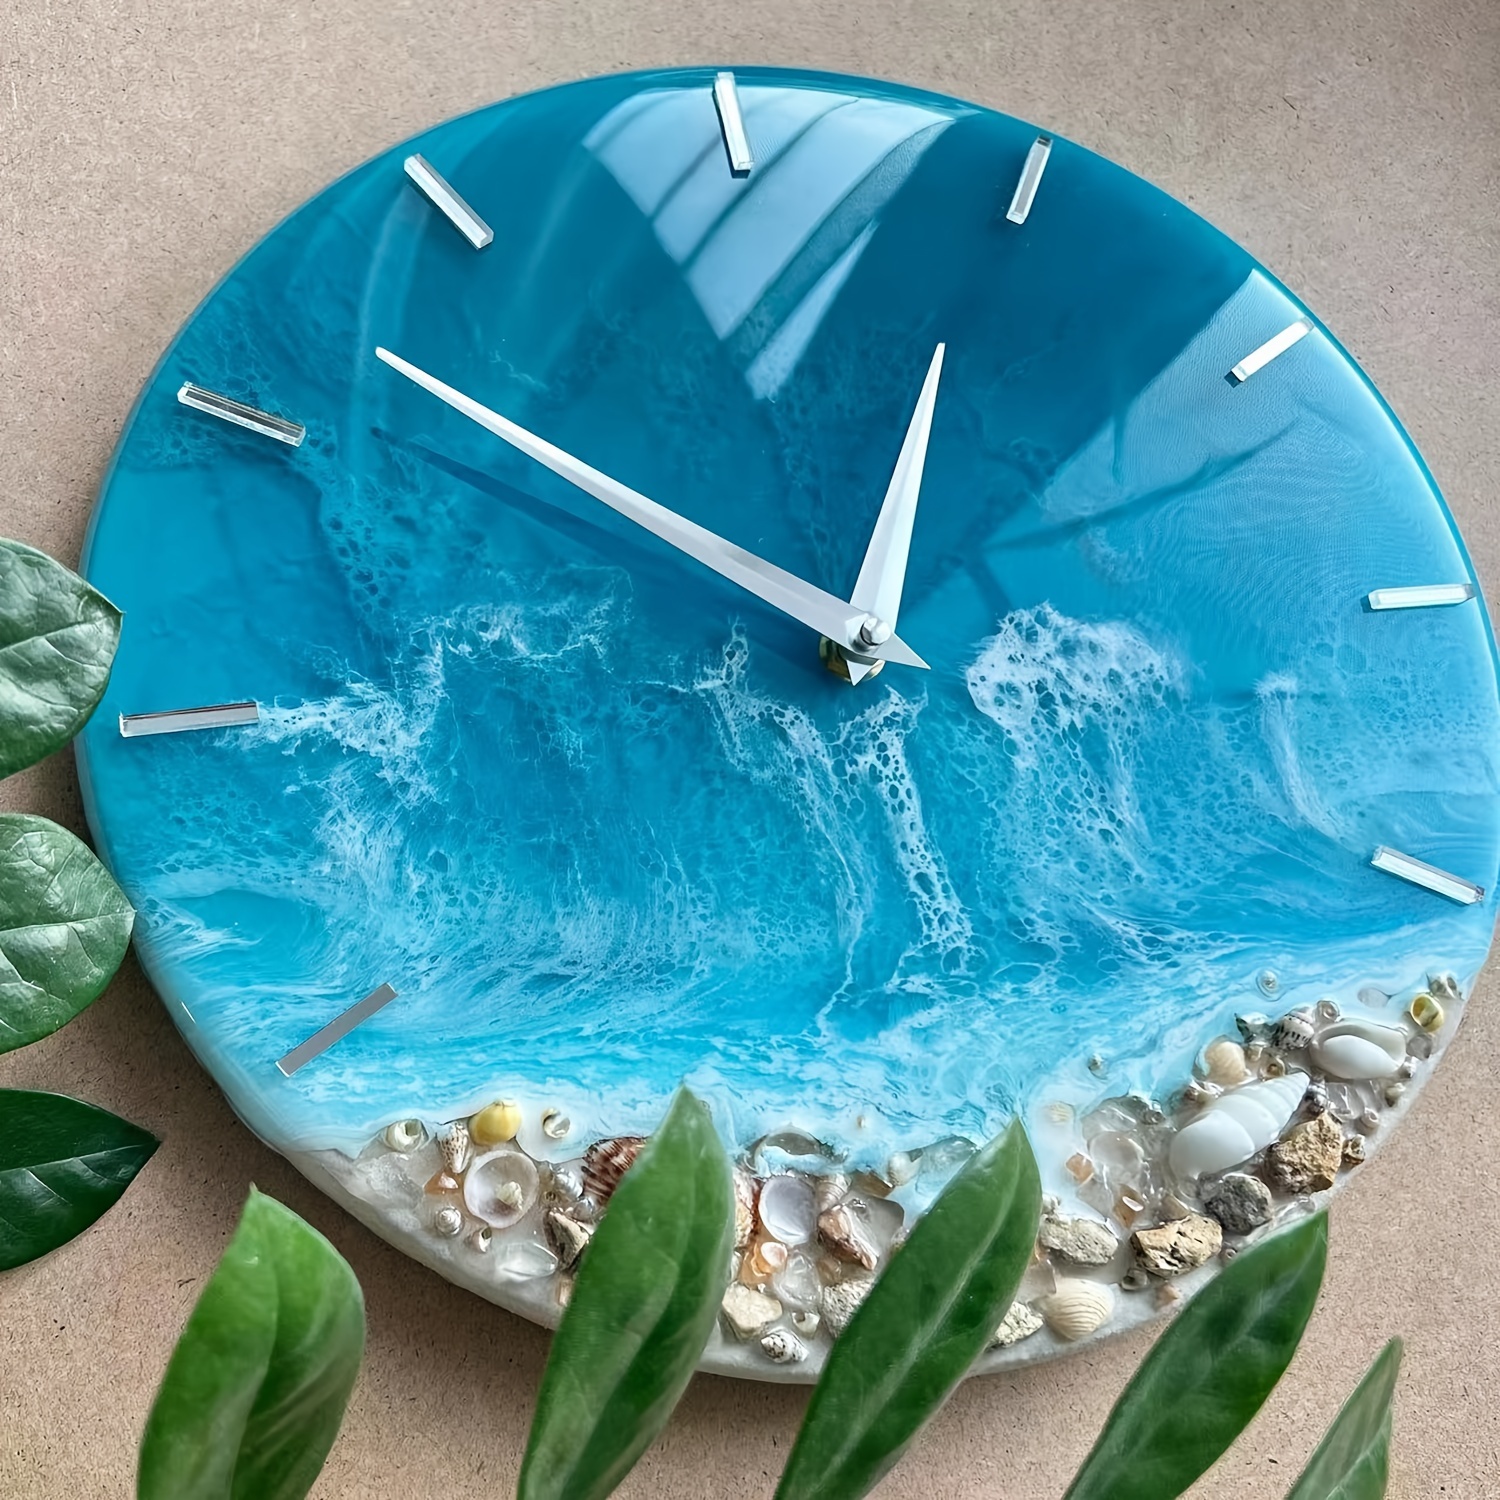 Clock Resin Molds Large Number Clock Silicone Mold Epoxy Clock Mold For  Resin